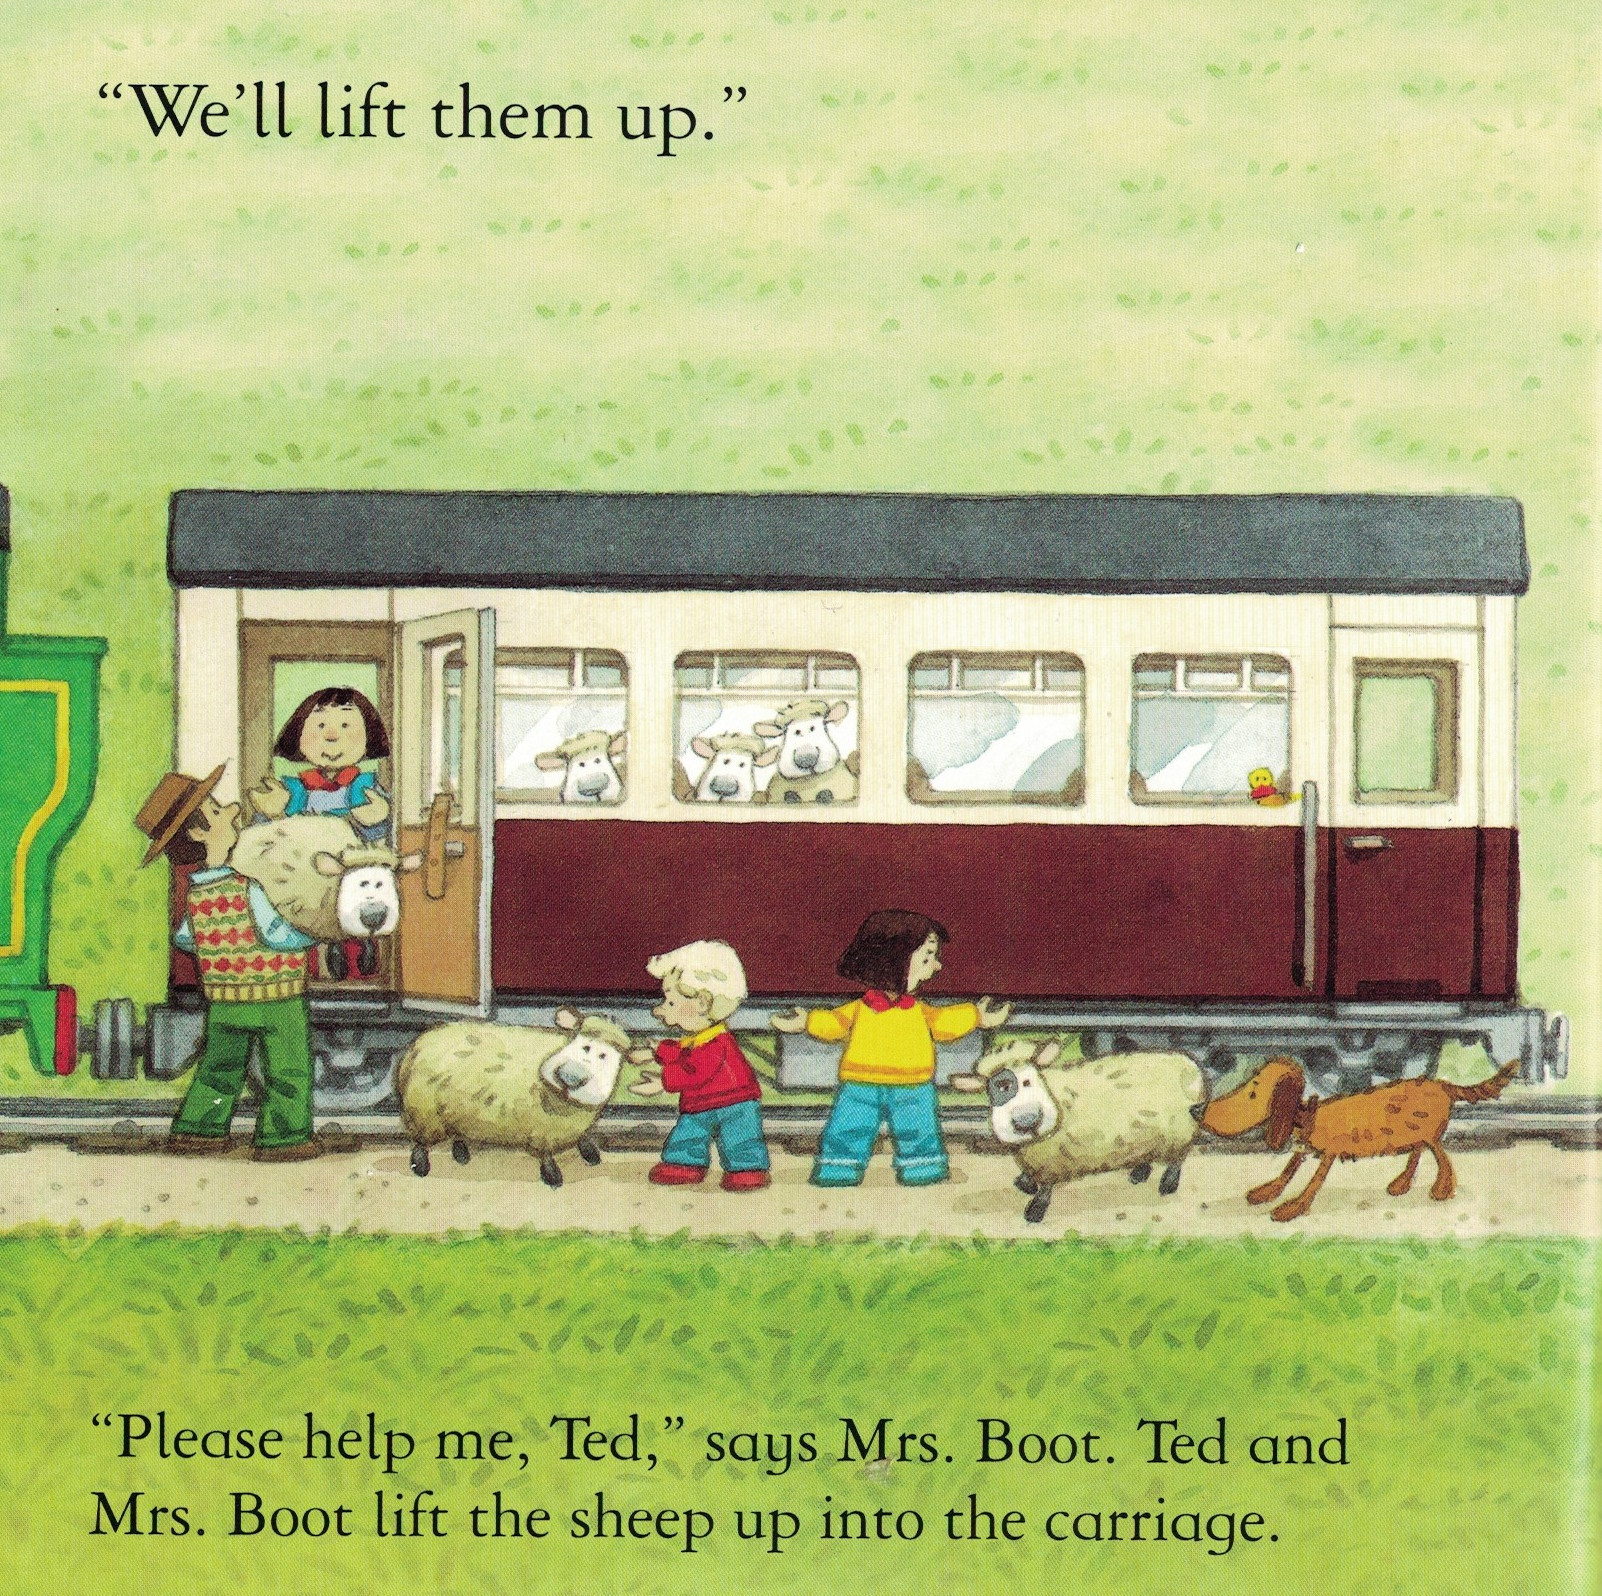 woolly stops the train lift them up